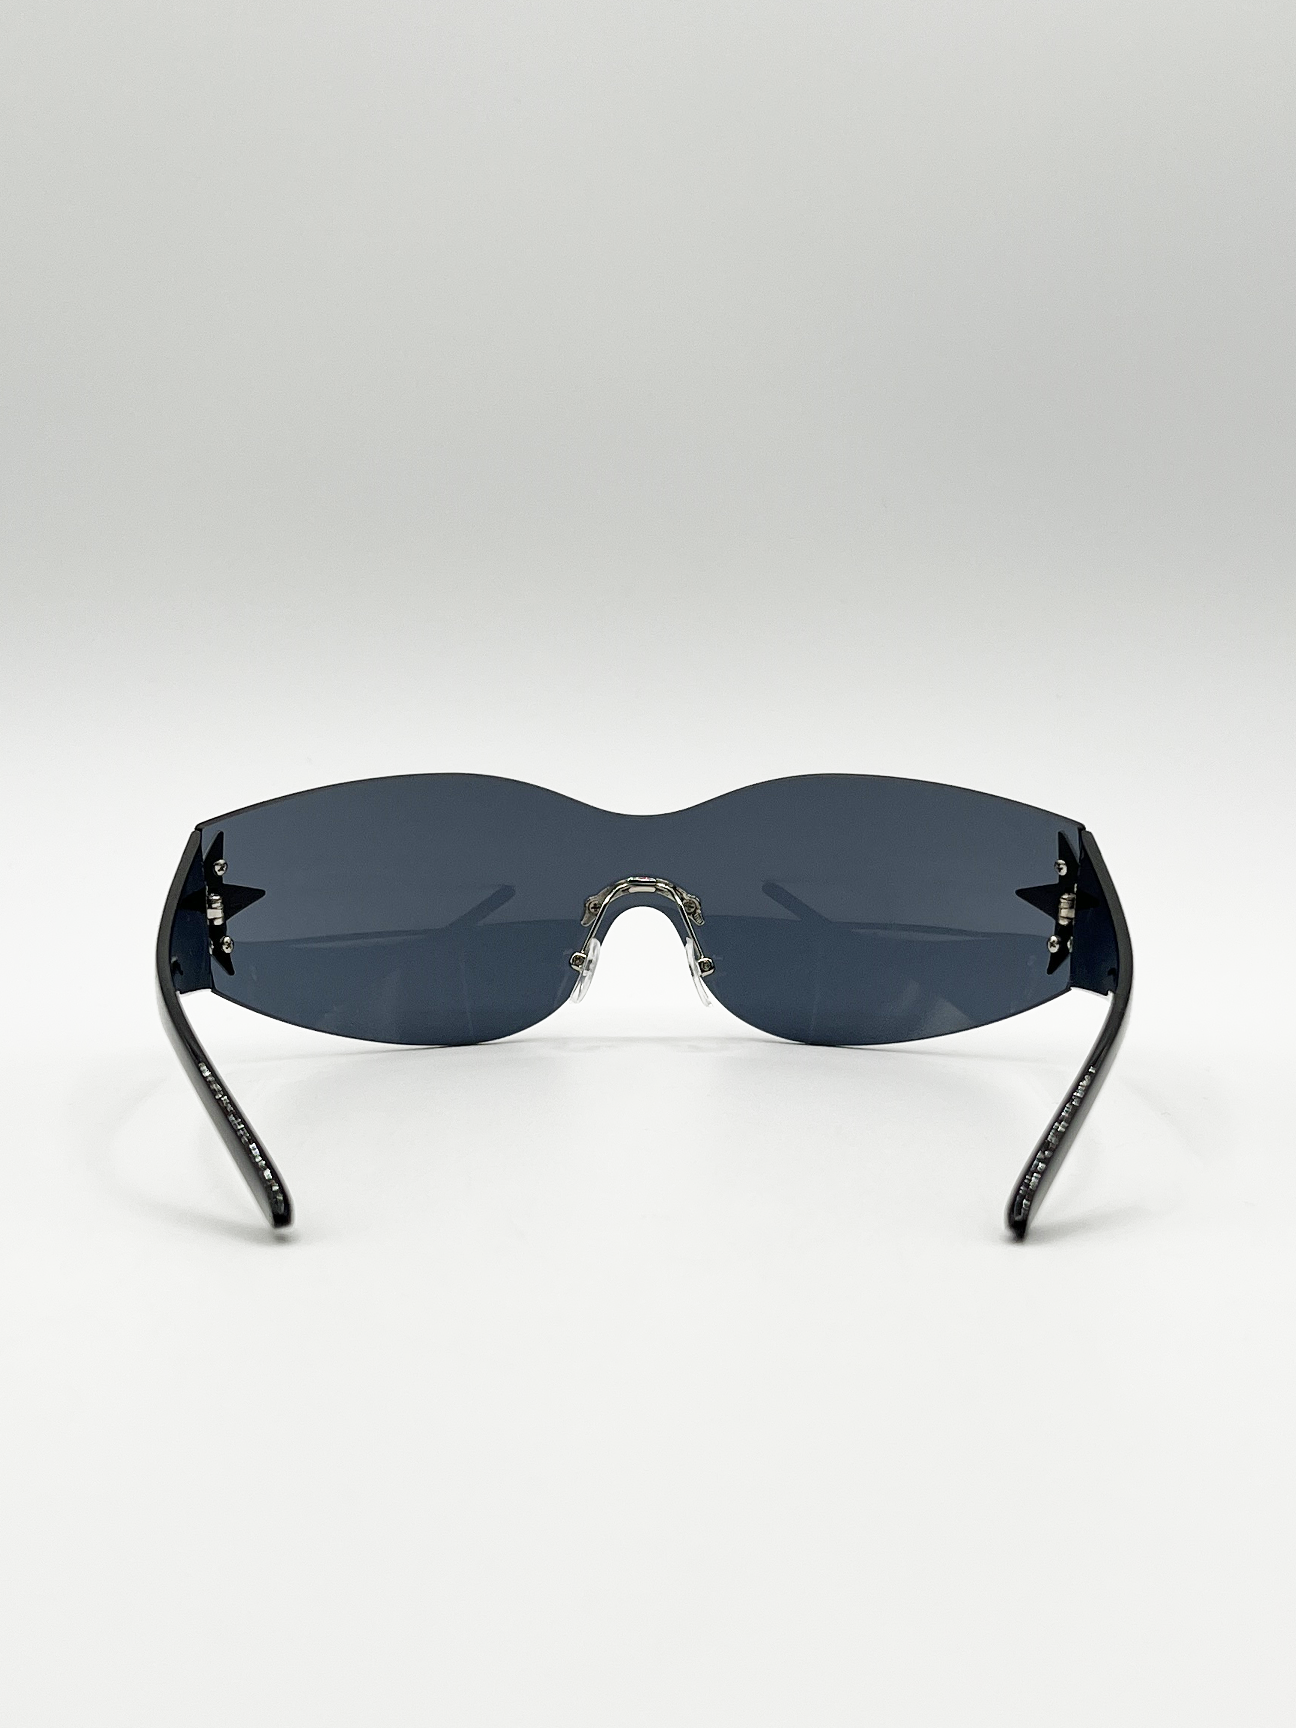 Wrap Around Racer Sunglasses with Star Hinge Detail in Black